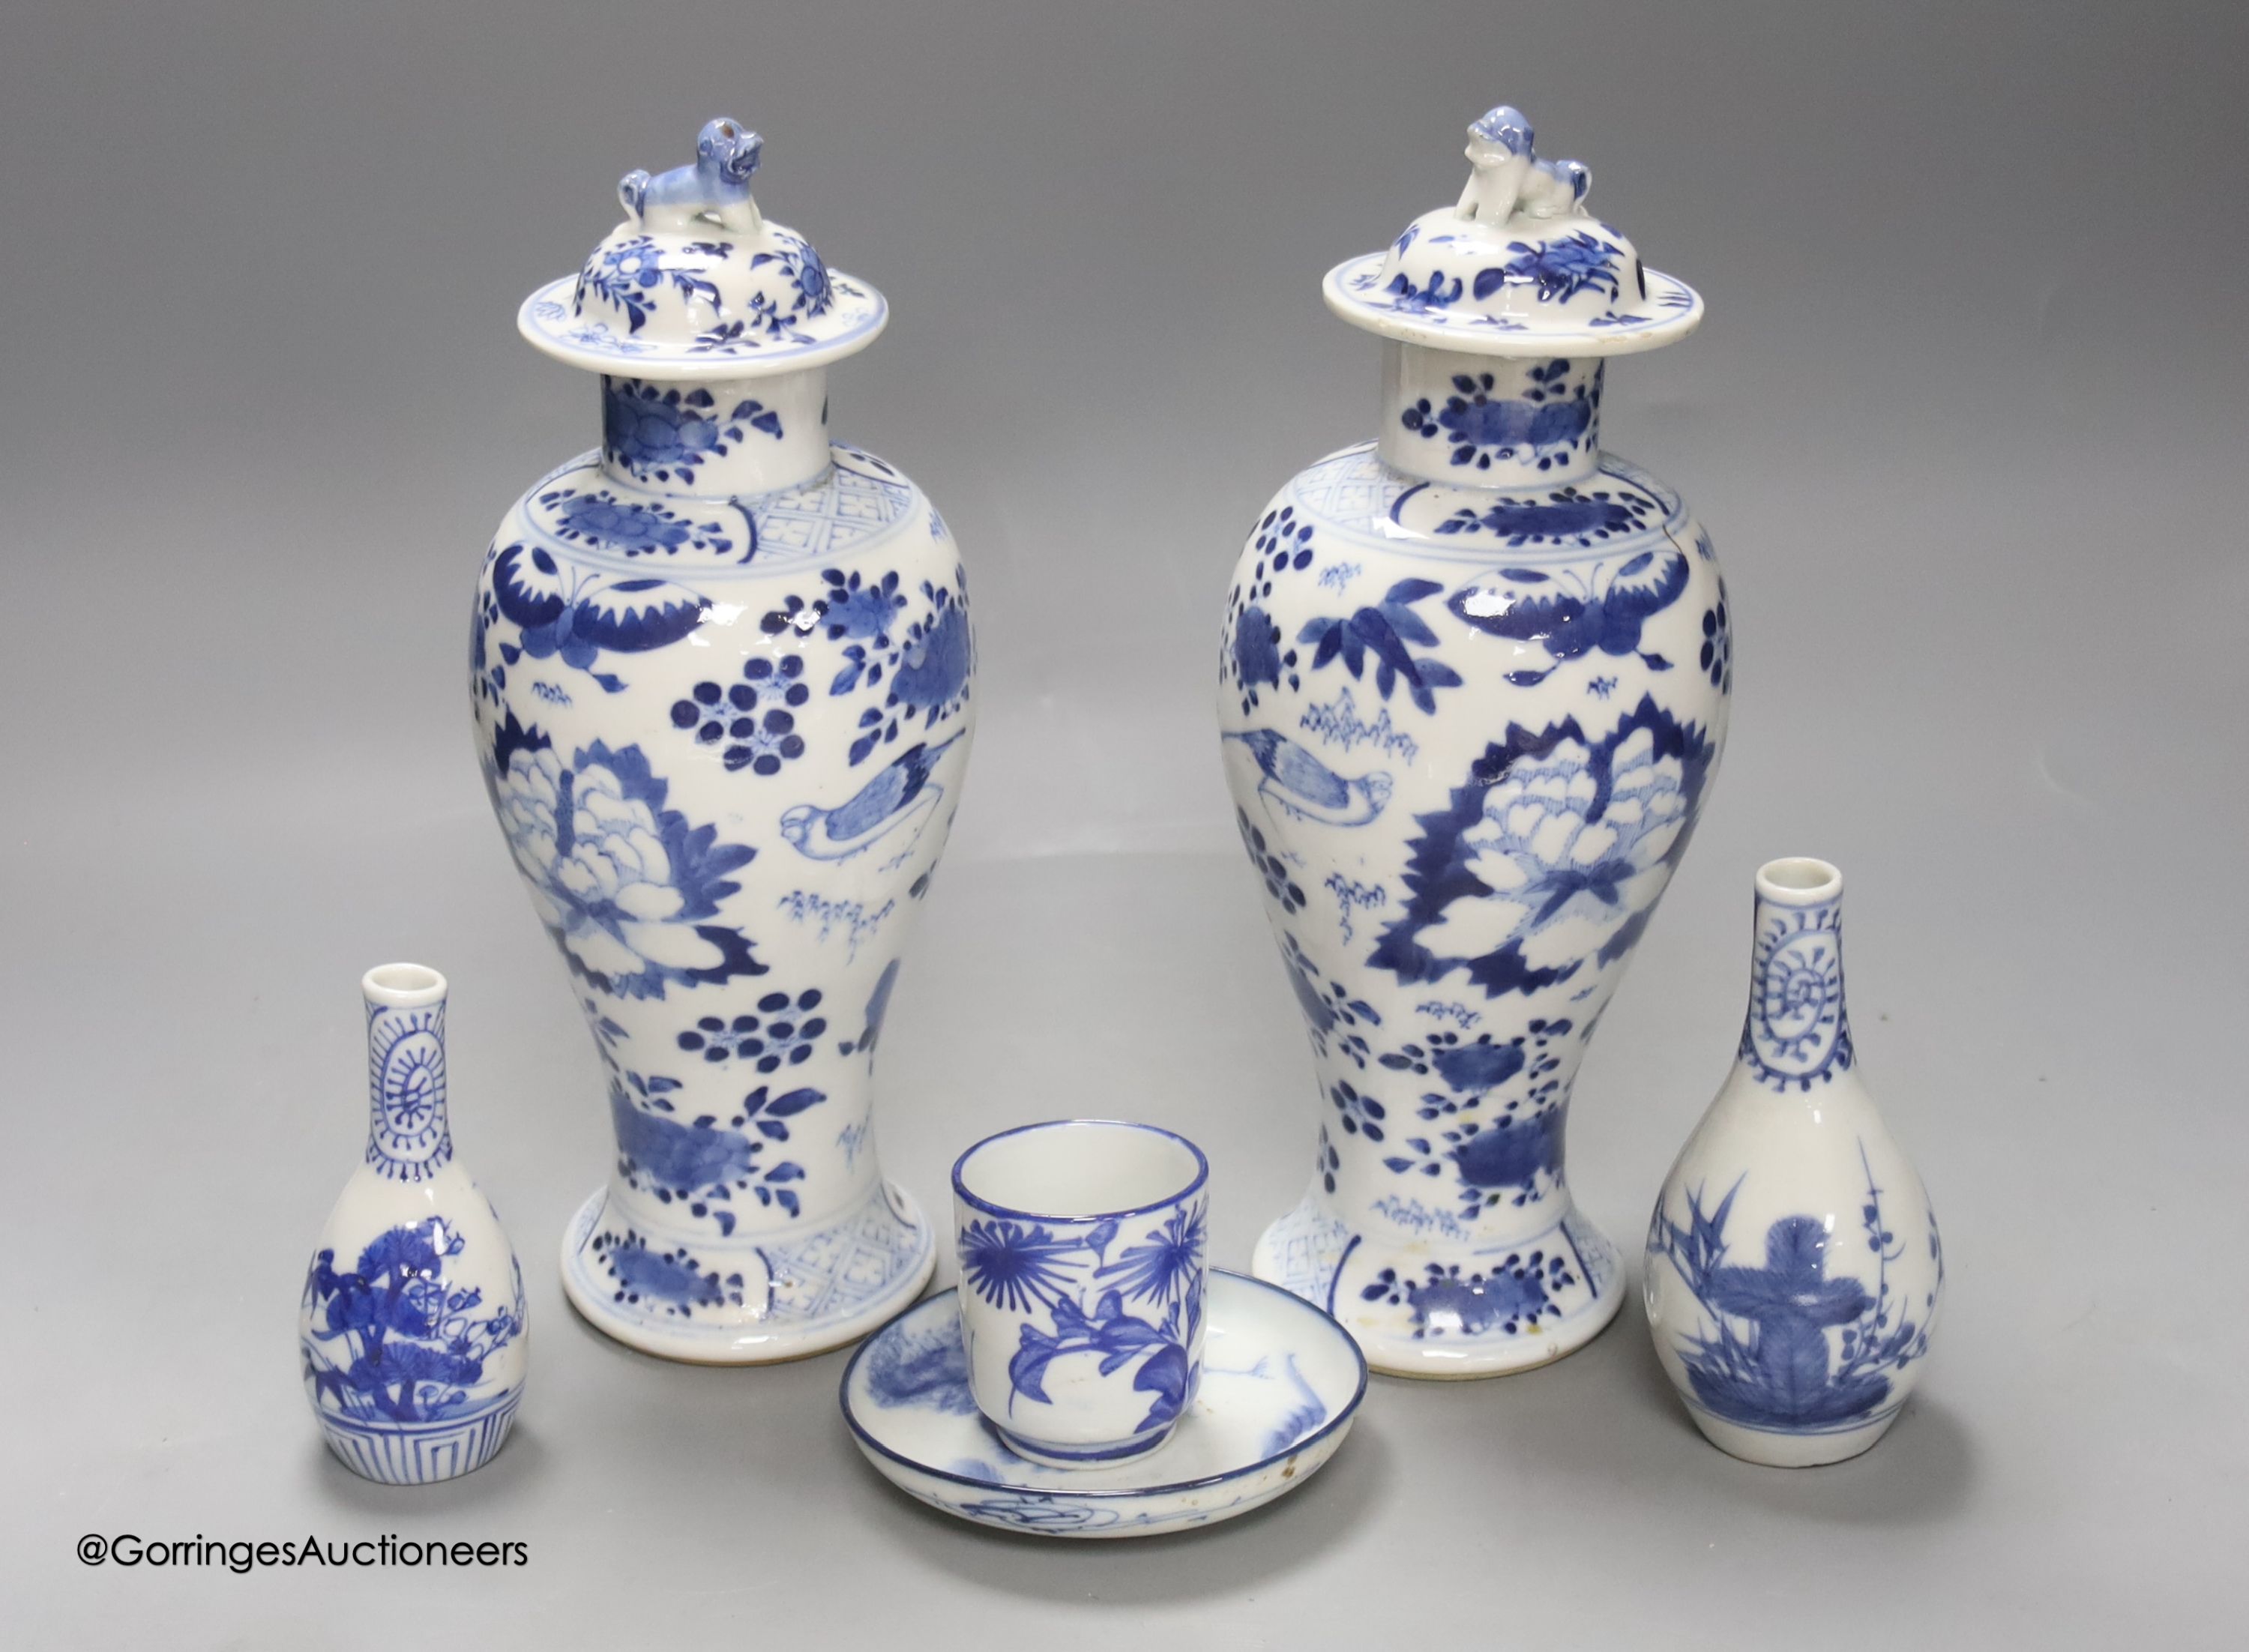 A pair of lidded Chinese blue and white vases, c.1900, Kangxi marks, 23cm high, together with two small Japanese vases, and a cup and saucer (6)